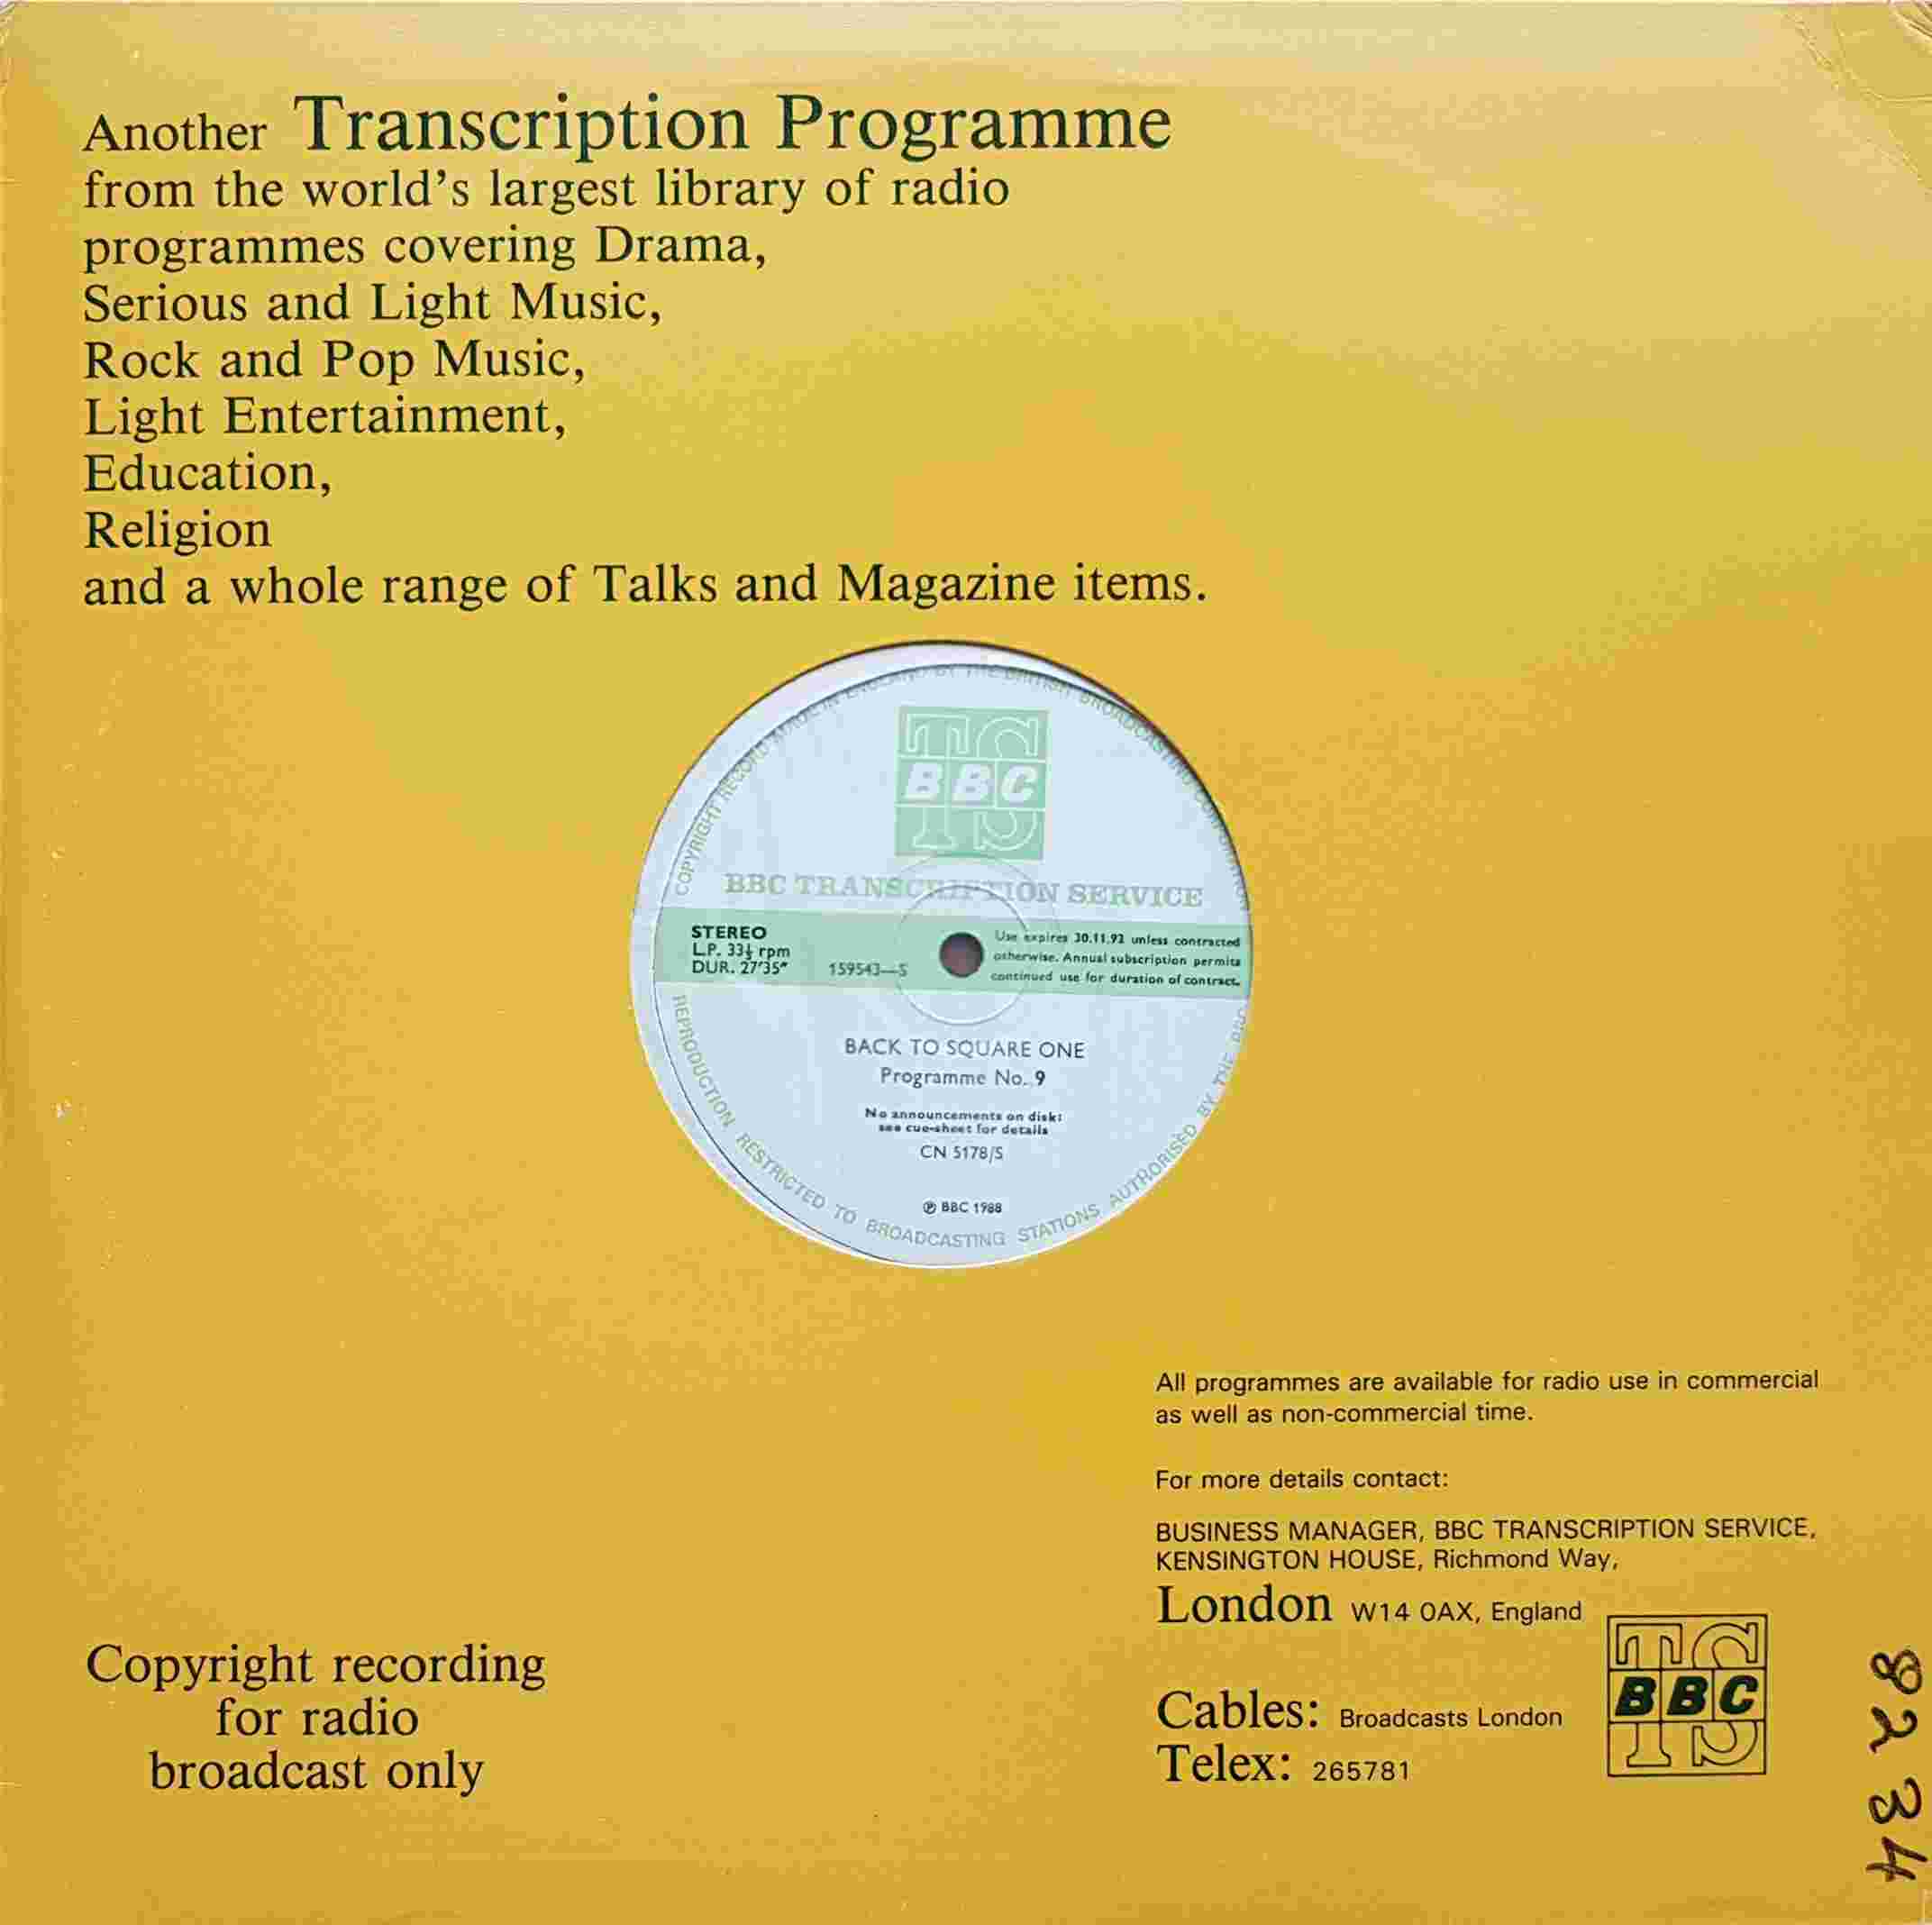 Picture of CN 5178 S 5 Back to square one - Programme 9 & 10 by artist Chris Serle from the BBC albums - Records and Tapes library